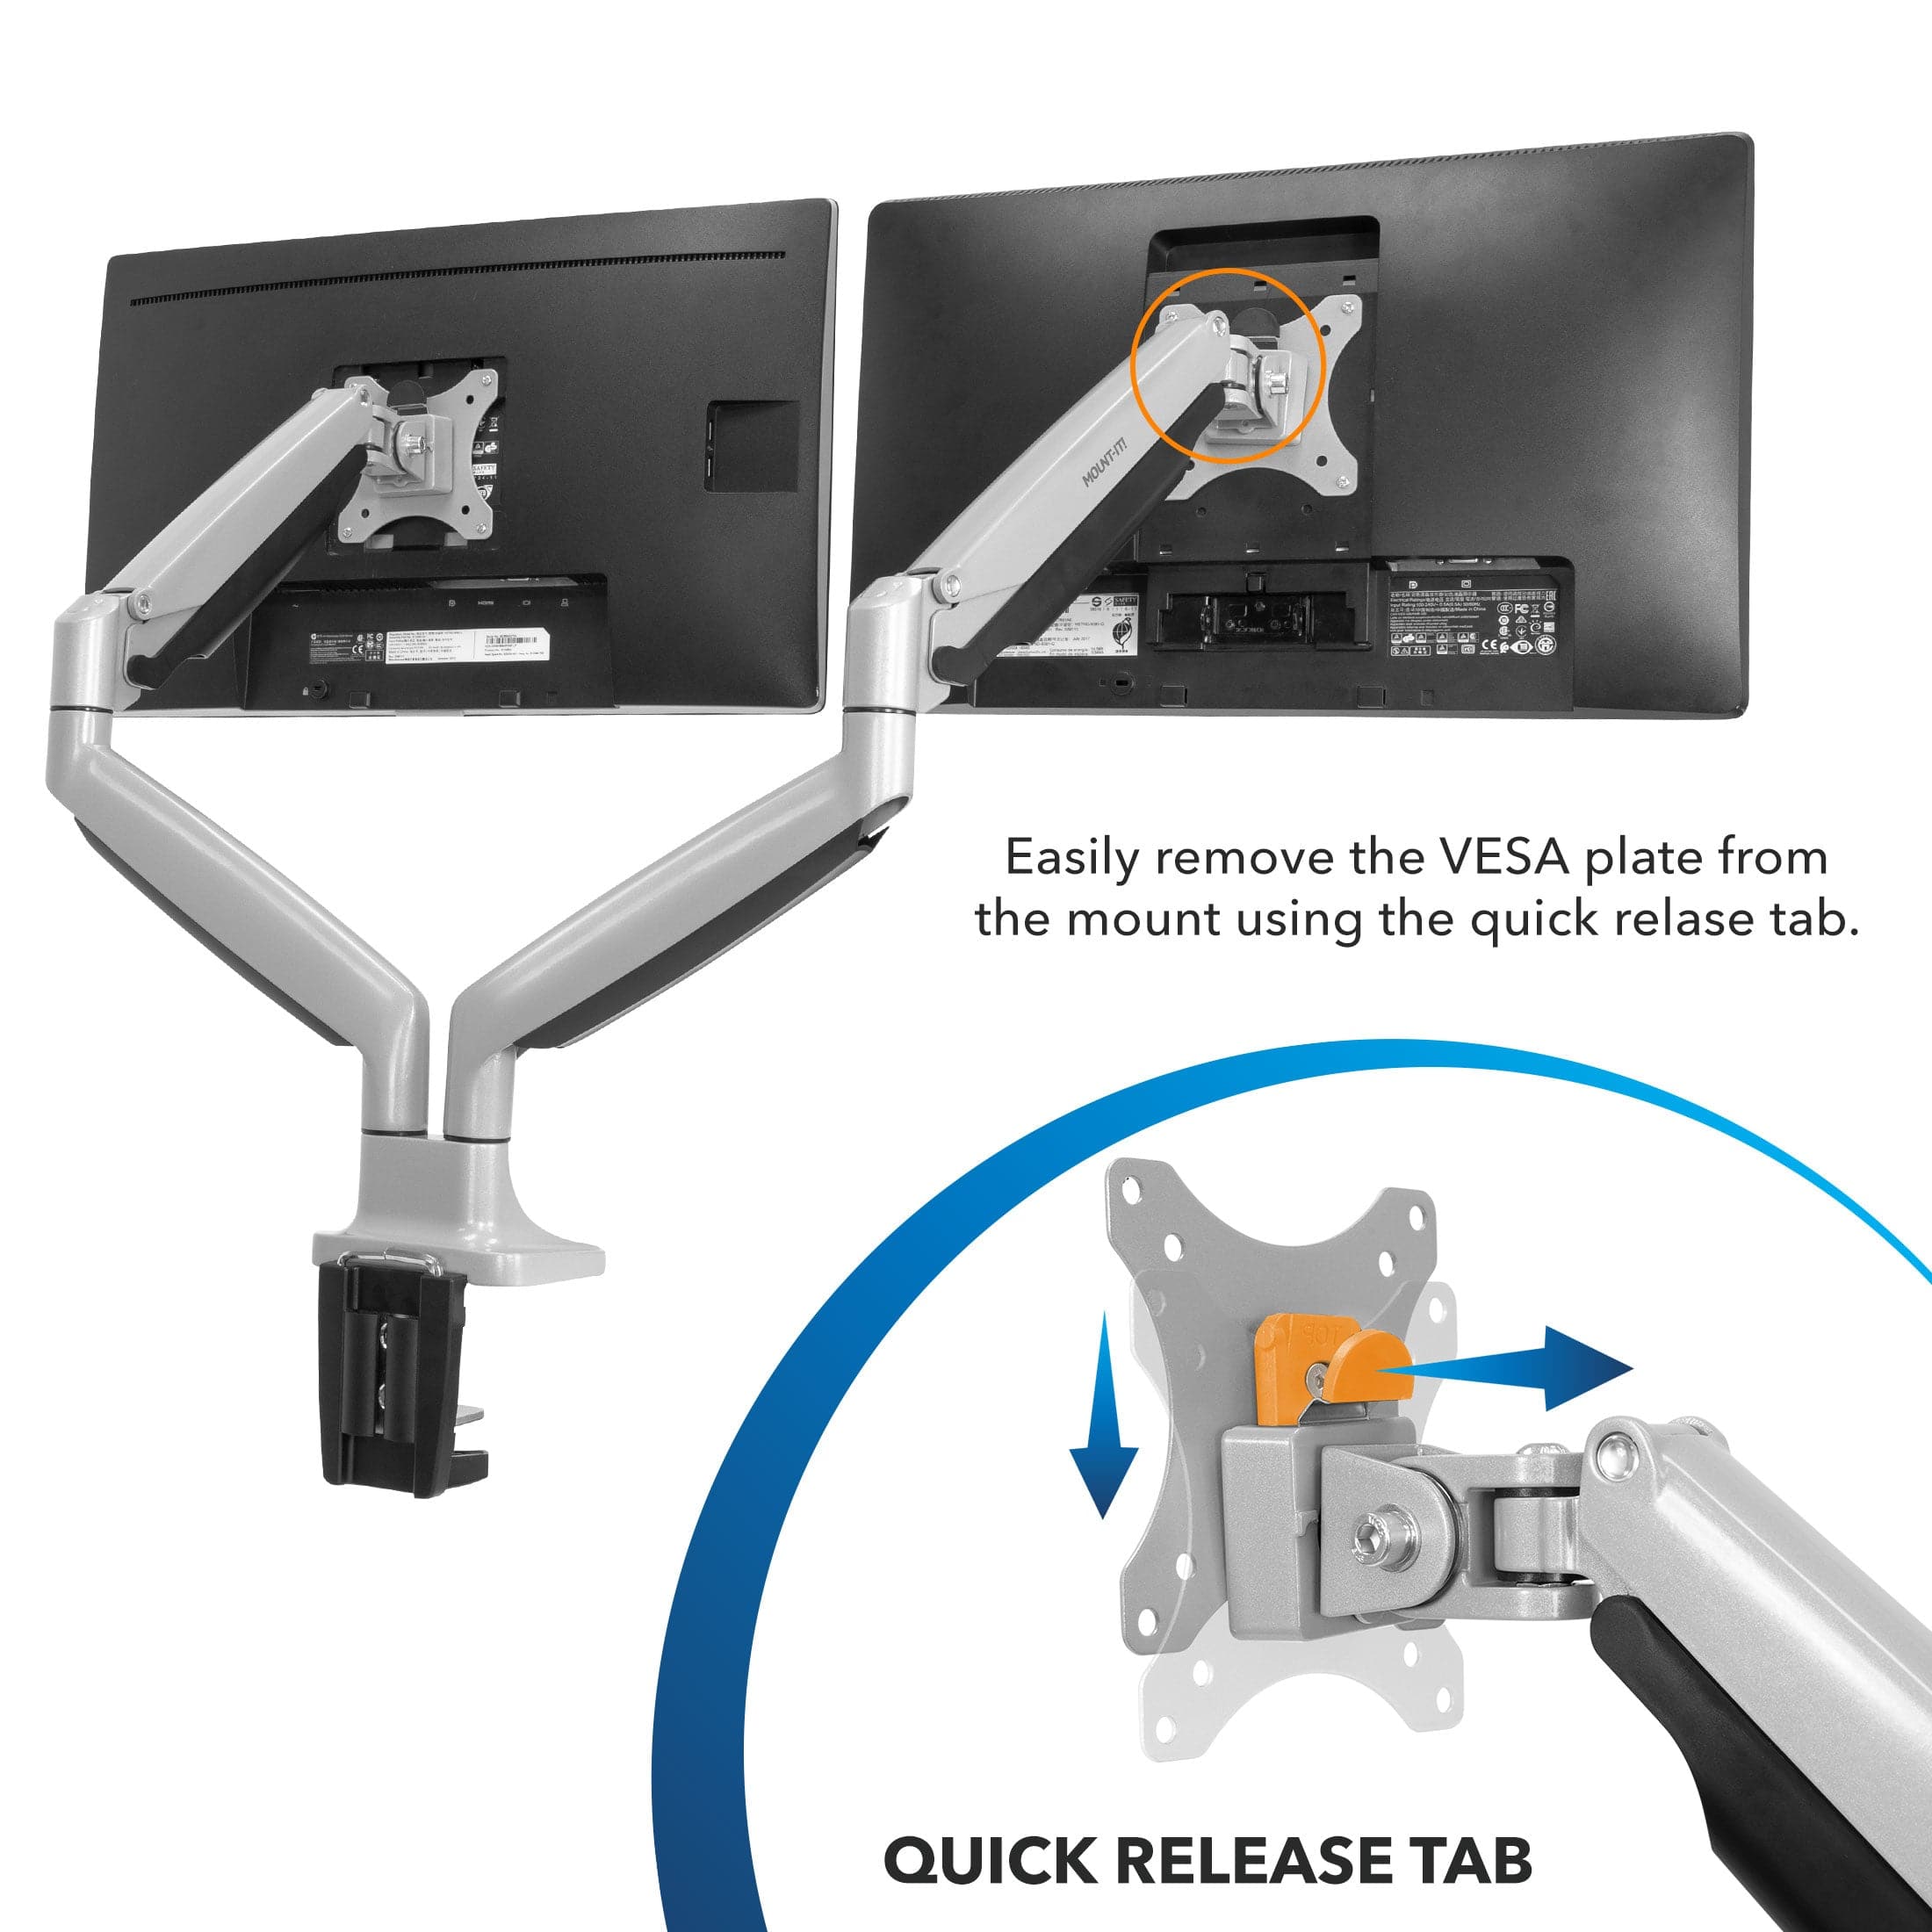 Dual Monitor Mount With Gas Spring Arms – Mount-It!